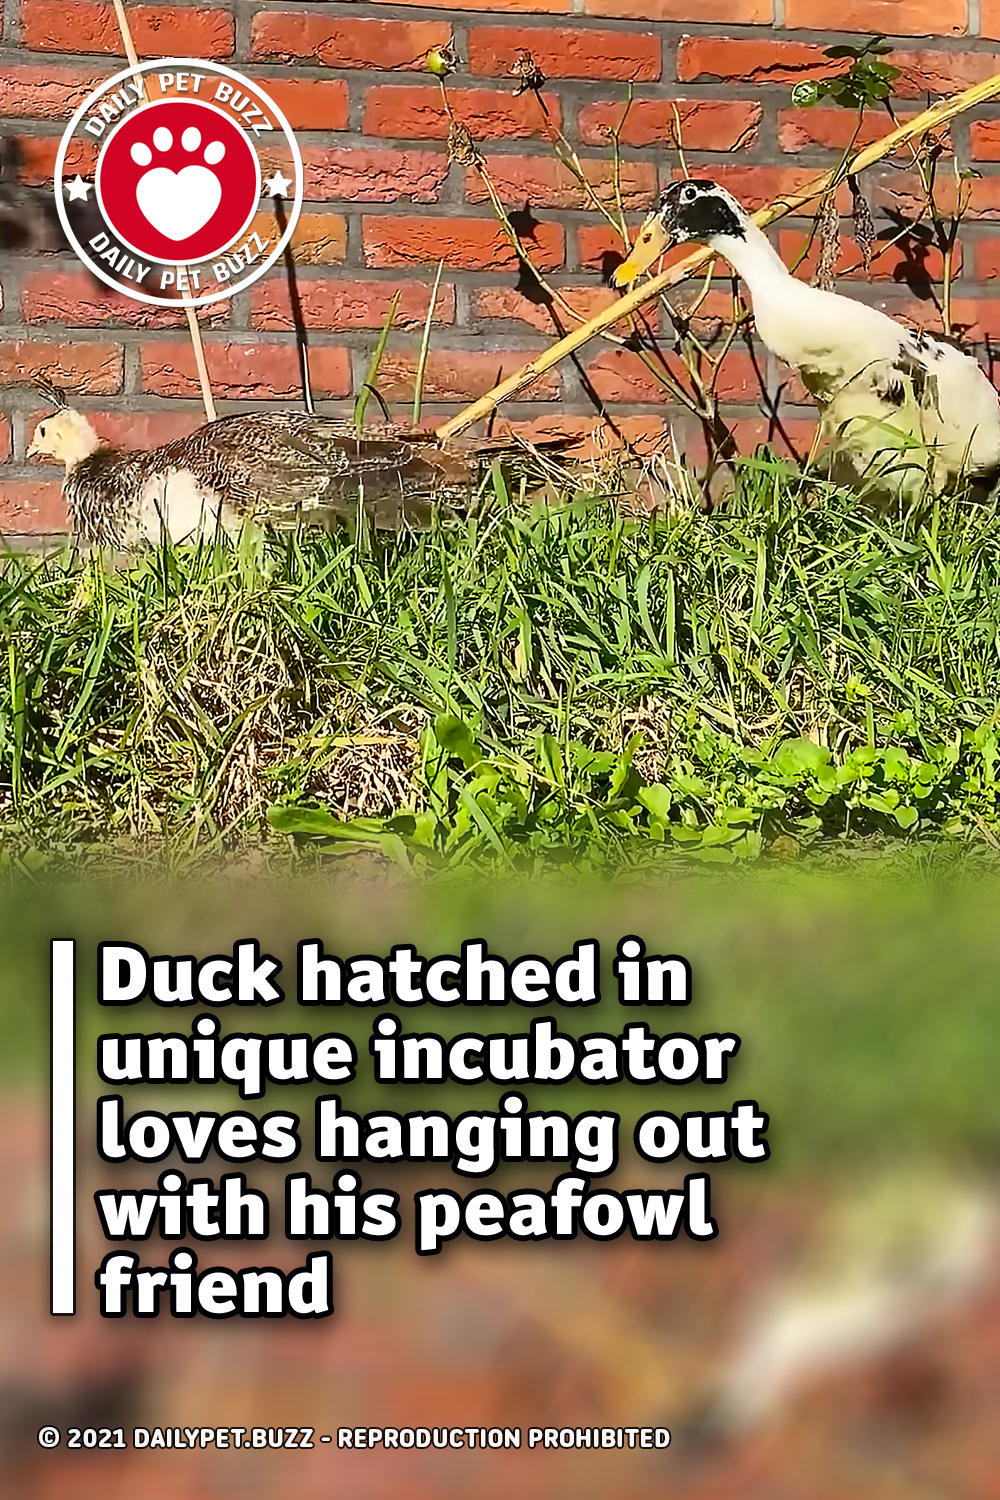 Duck hatched in unique incubator loves hanging out with his peafowl friend